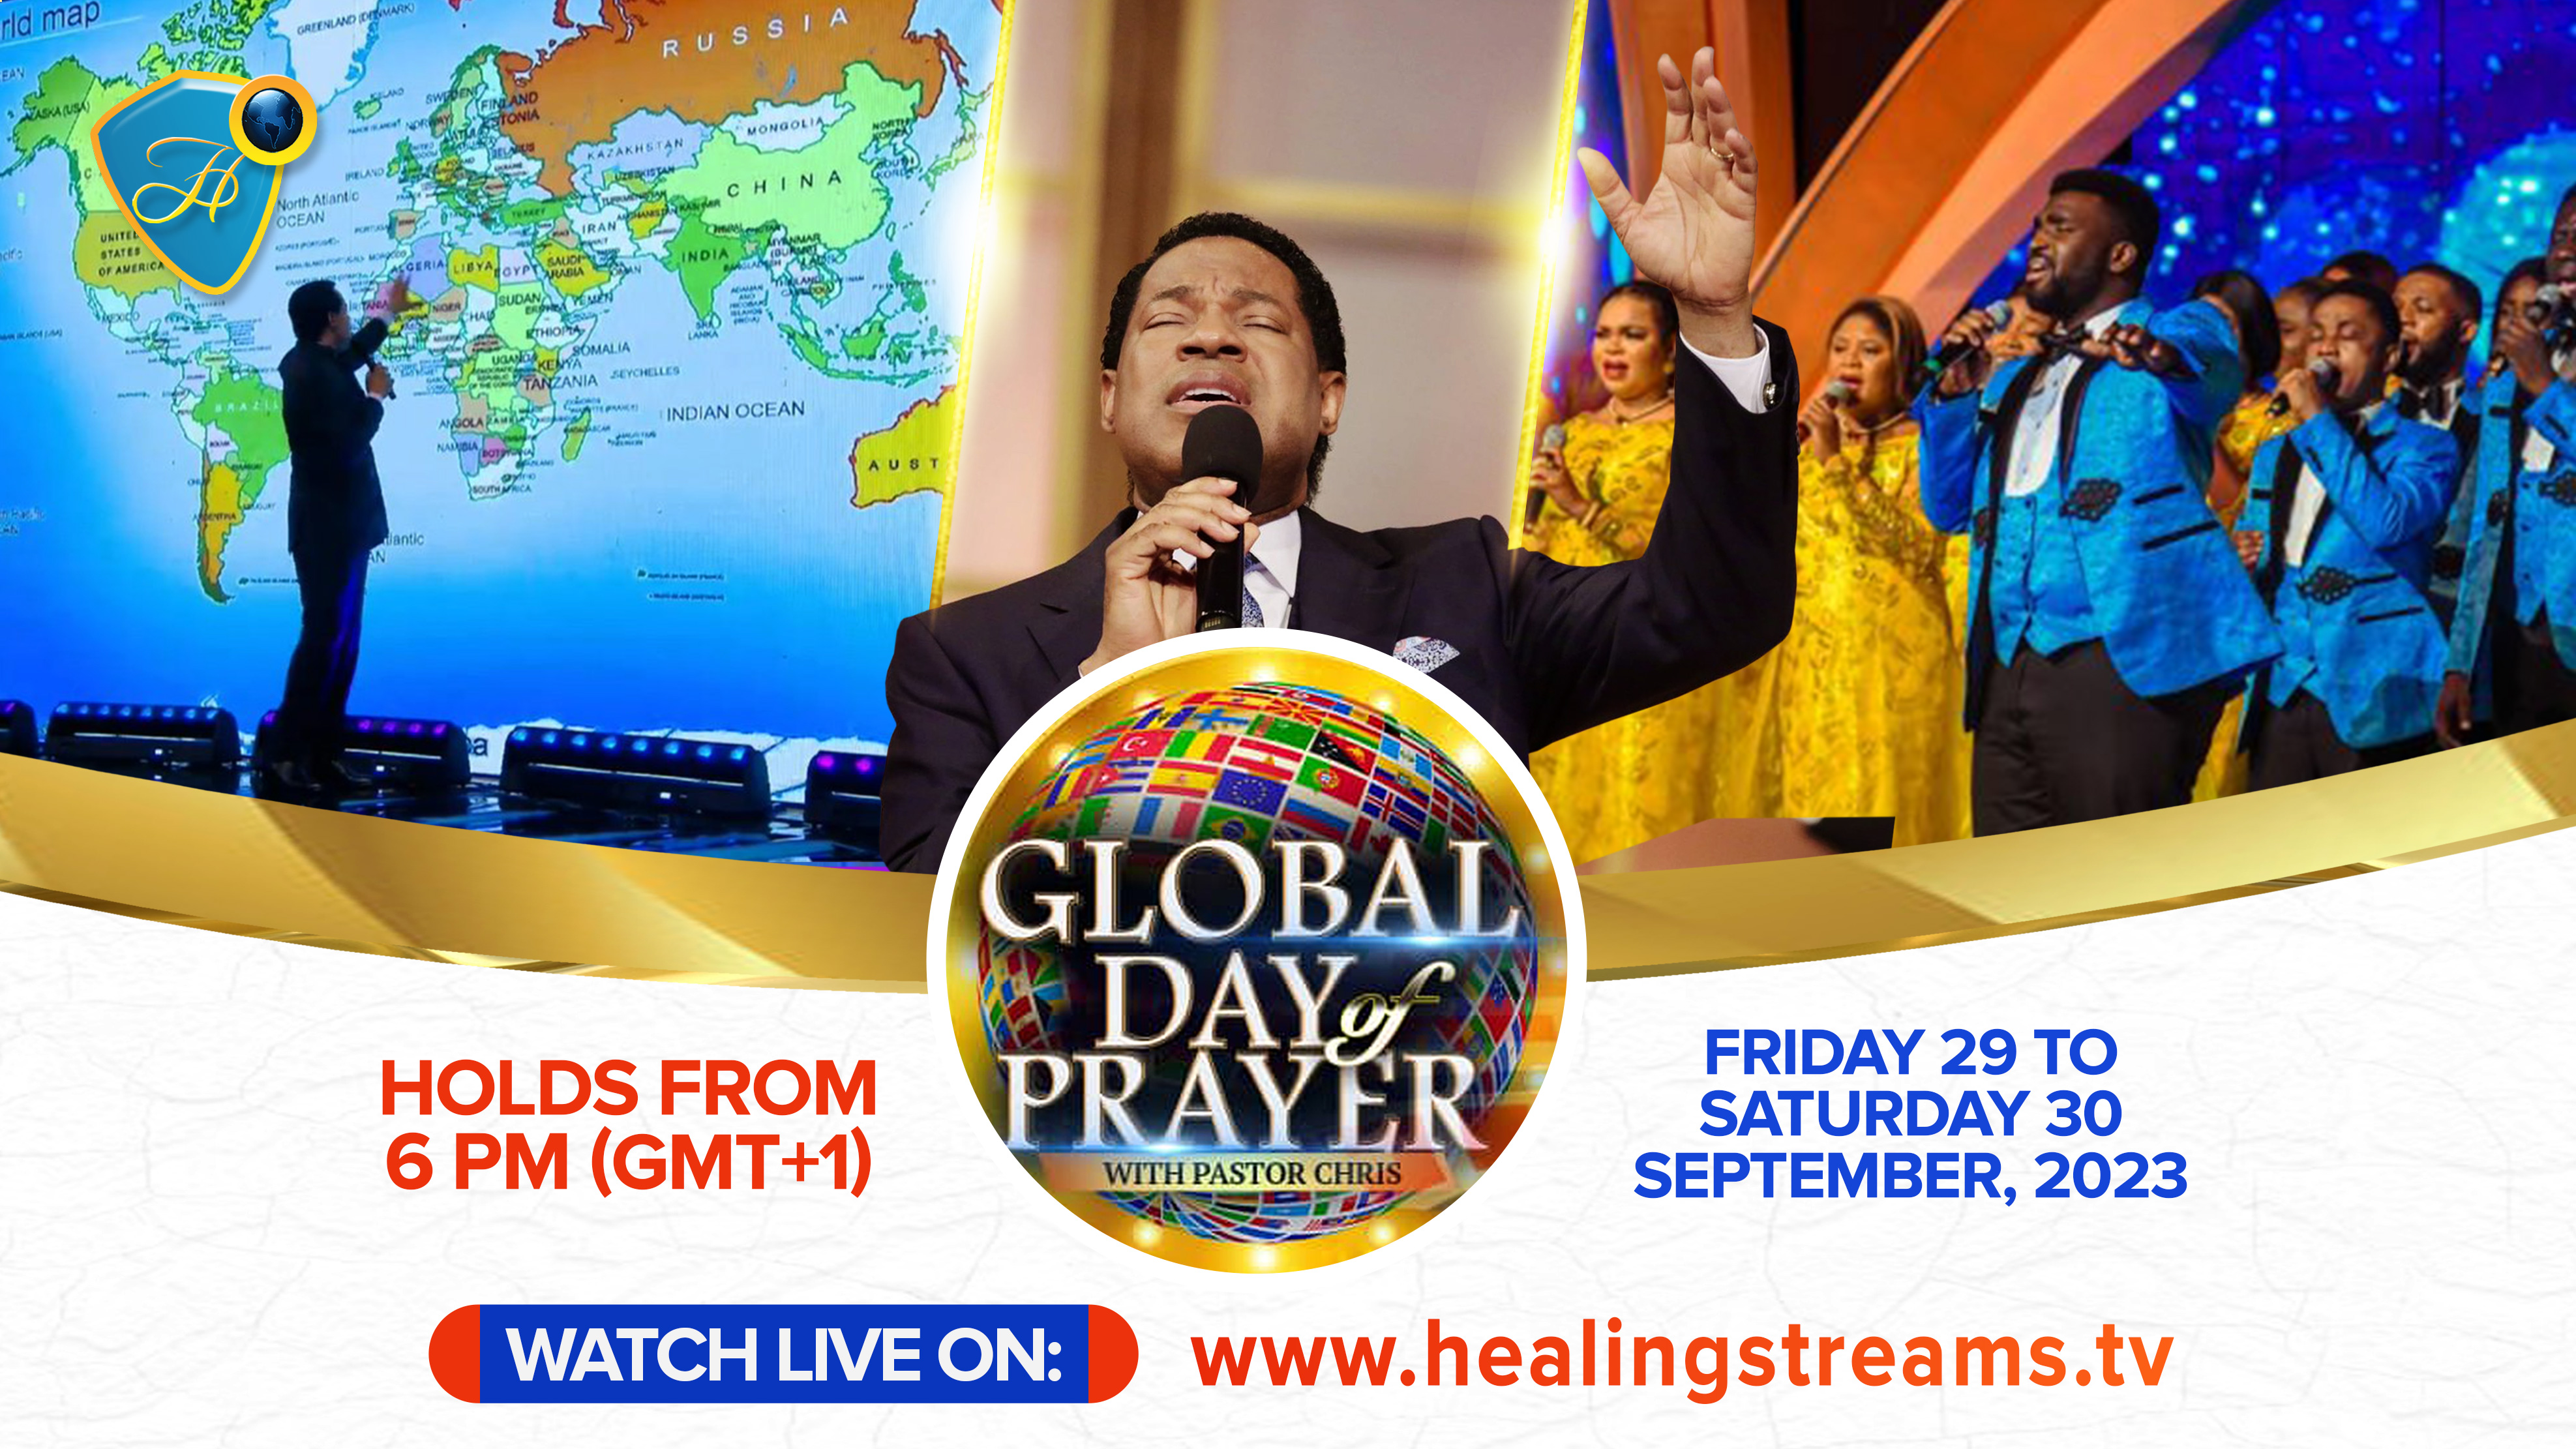 ELEVATE YOUR FAITH: JOIN THE 15TH GLOBAL DAY OF PRAYER WITH PASTOR CHRIS 